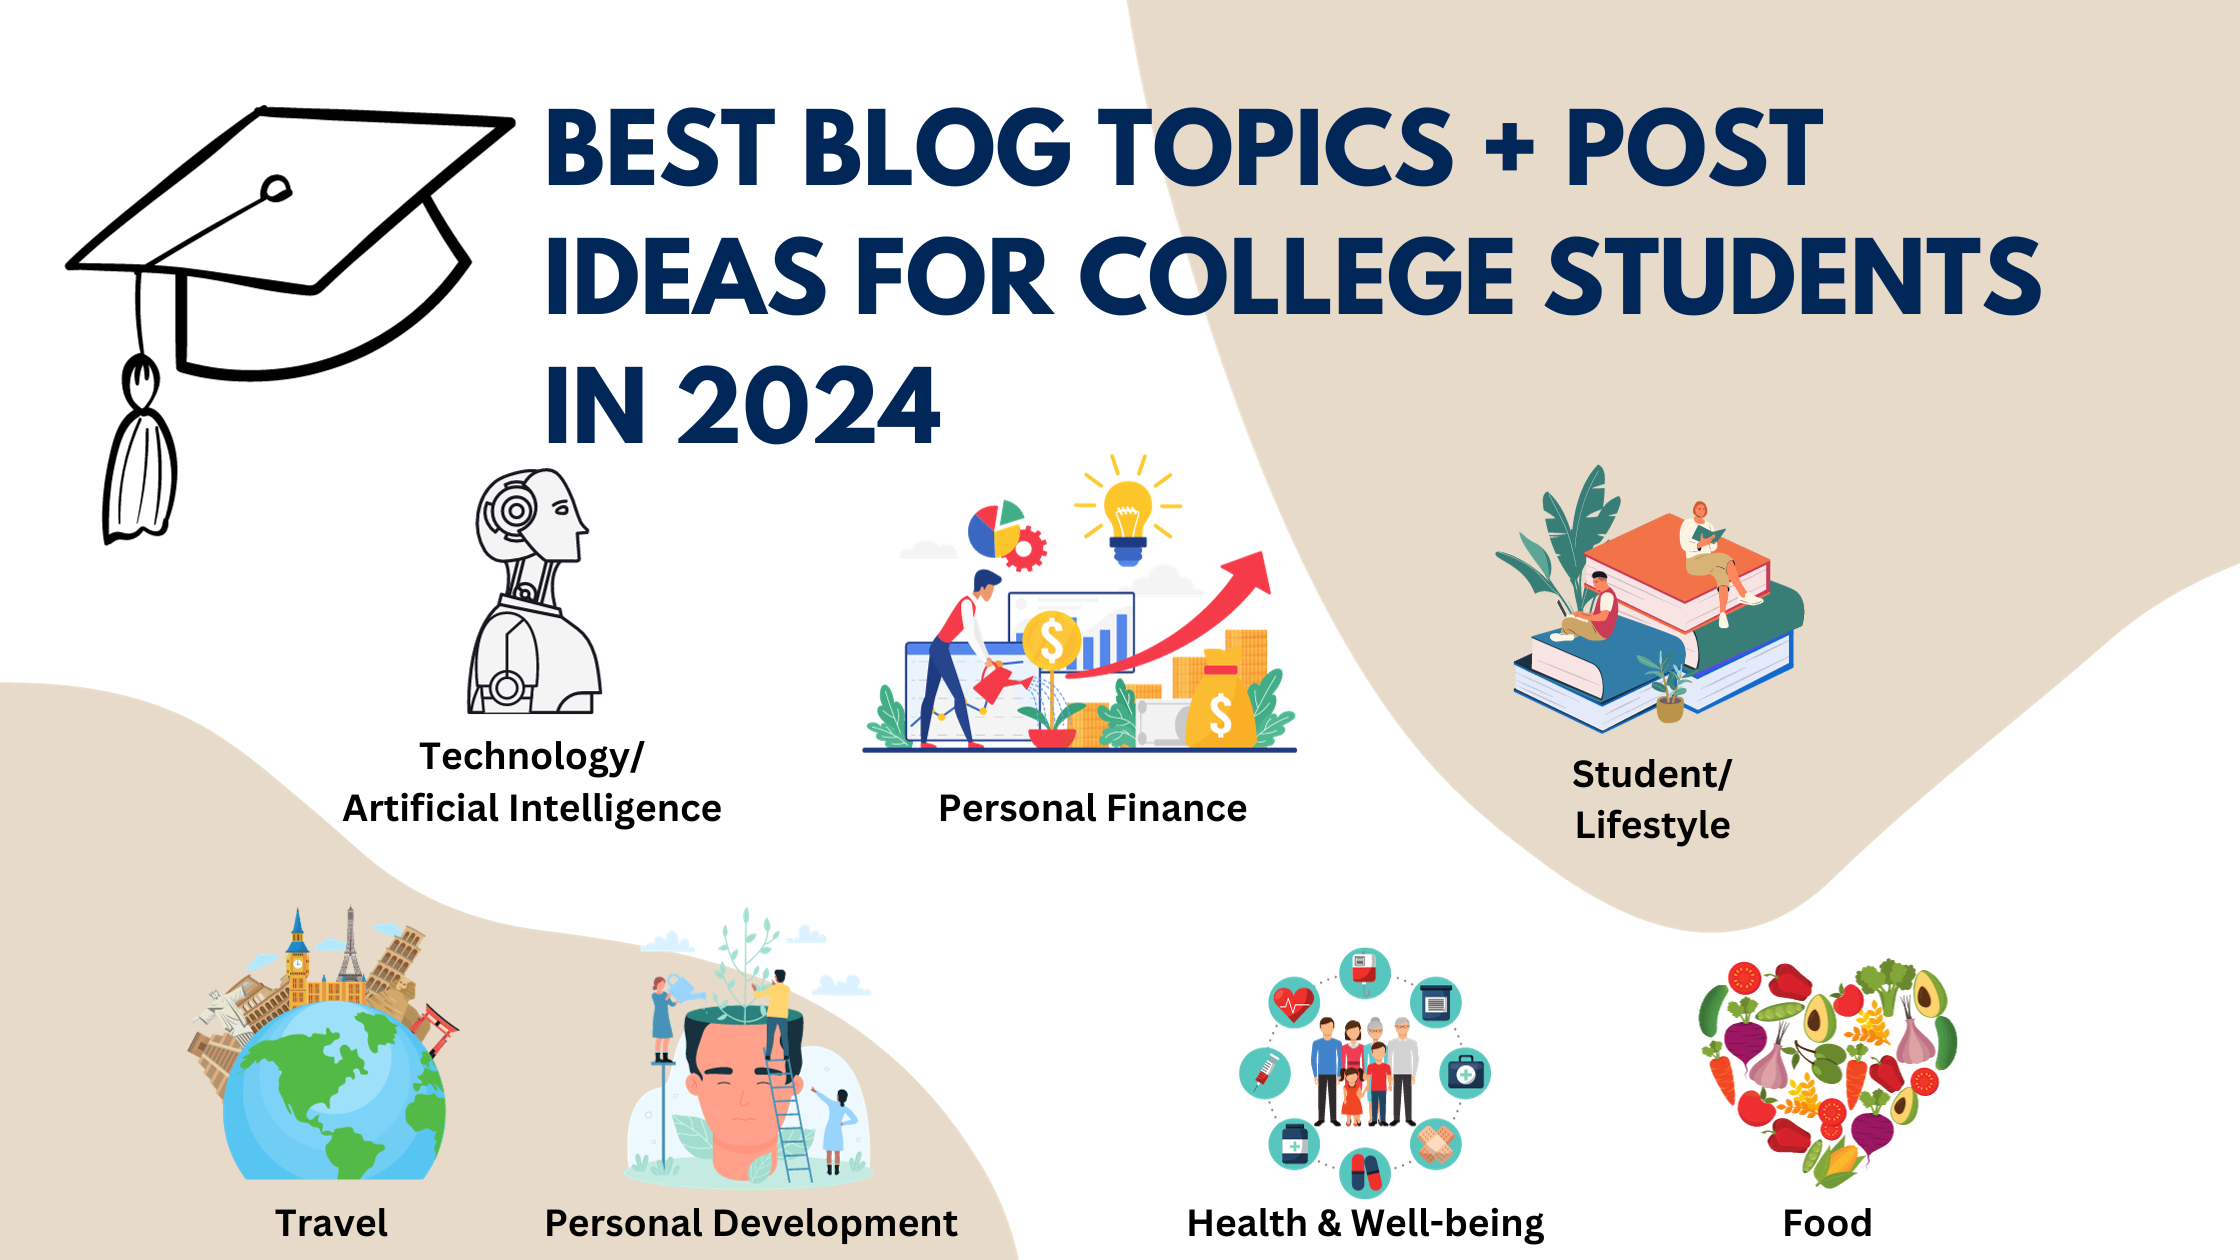 Featured image for blog topics for college students, showcasing a collage of topic-related images and a graduation hat, along with the text 'Best Blog Topics + Post Ideas For College Students In 2024.